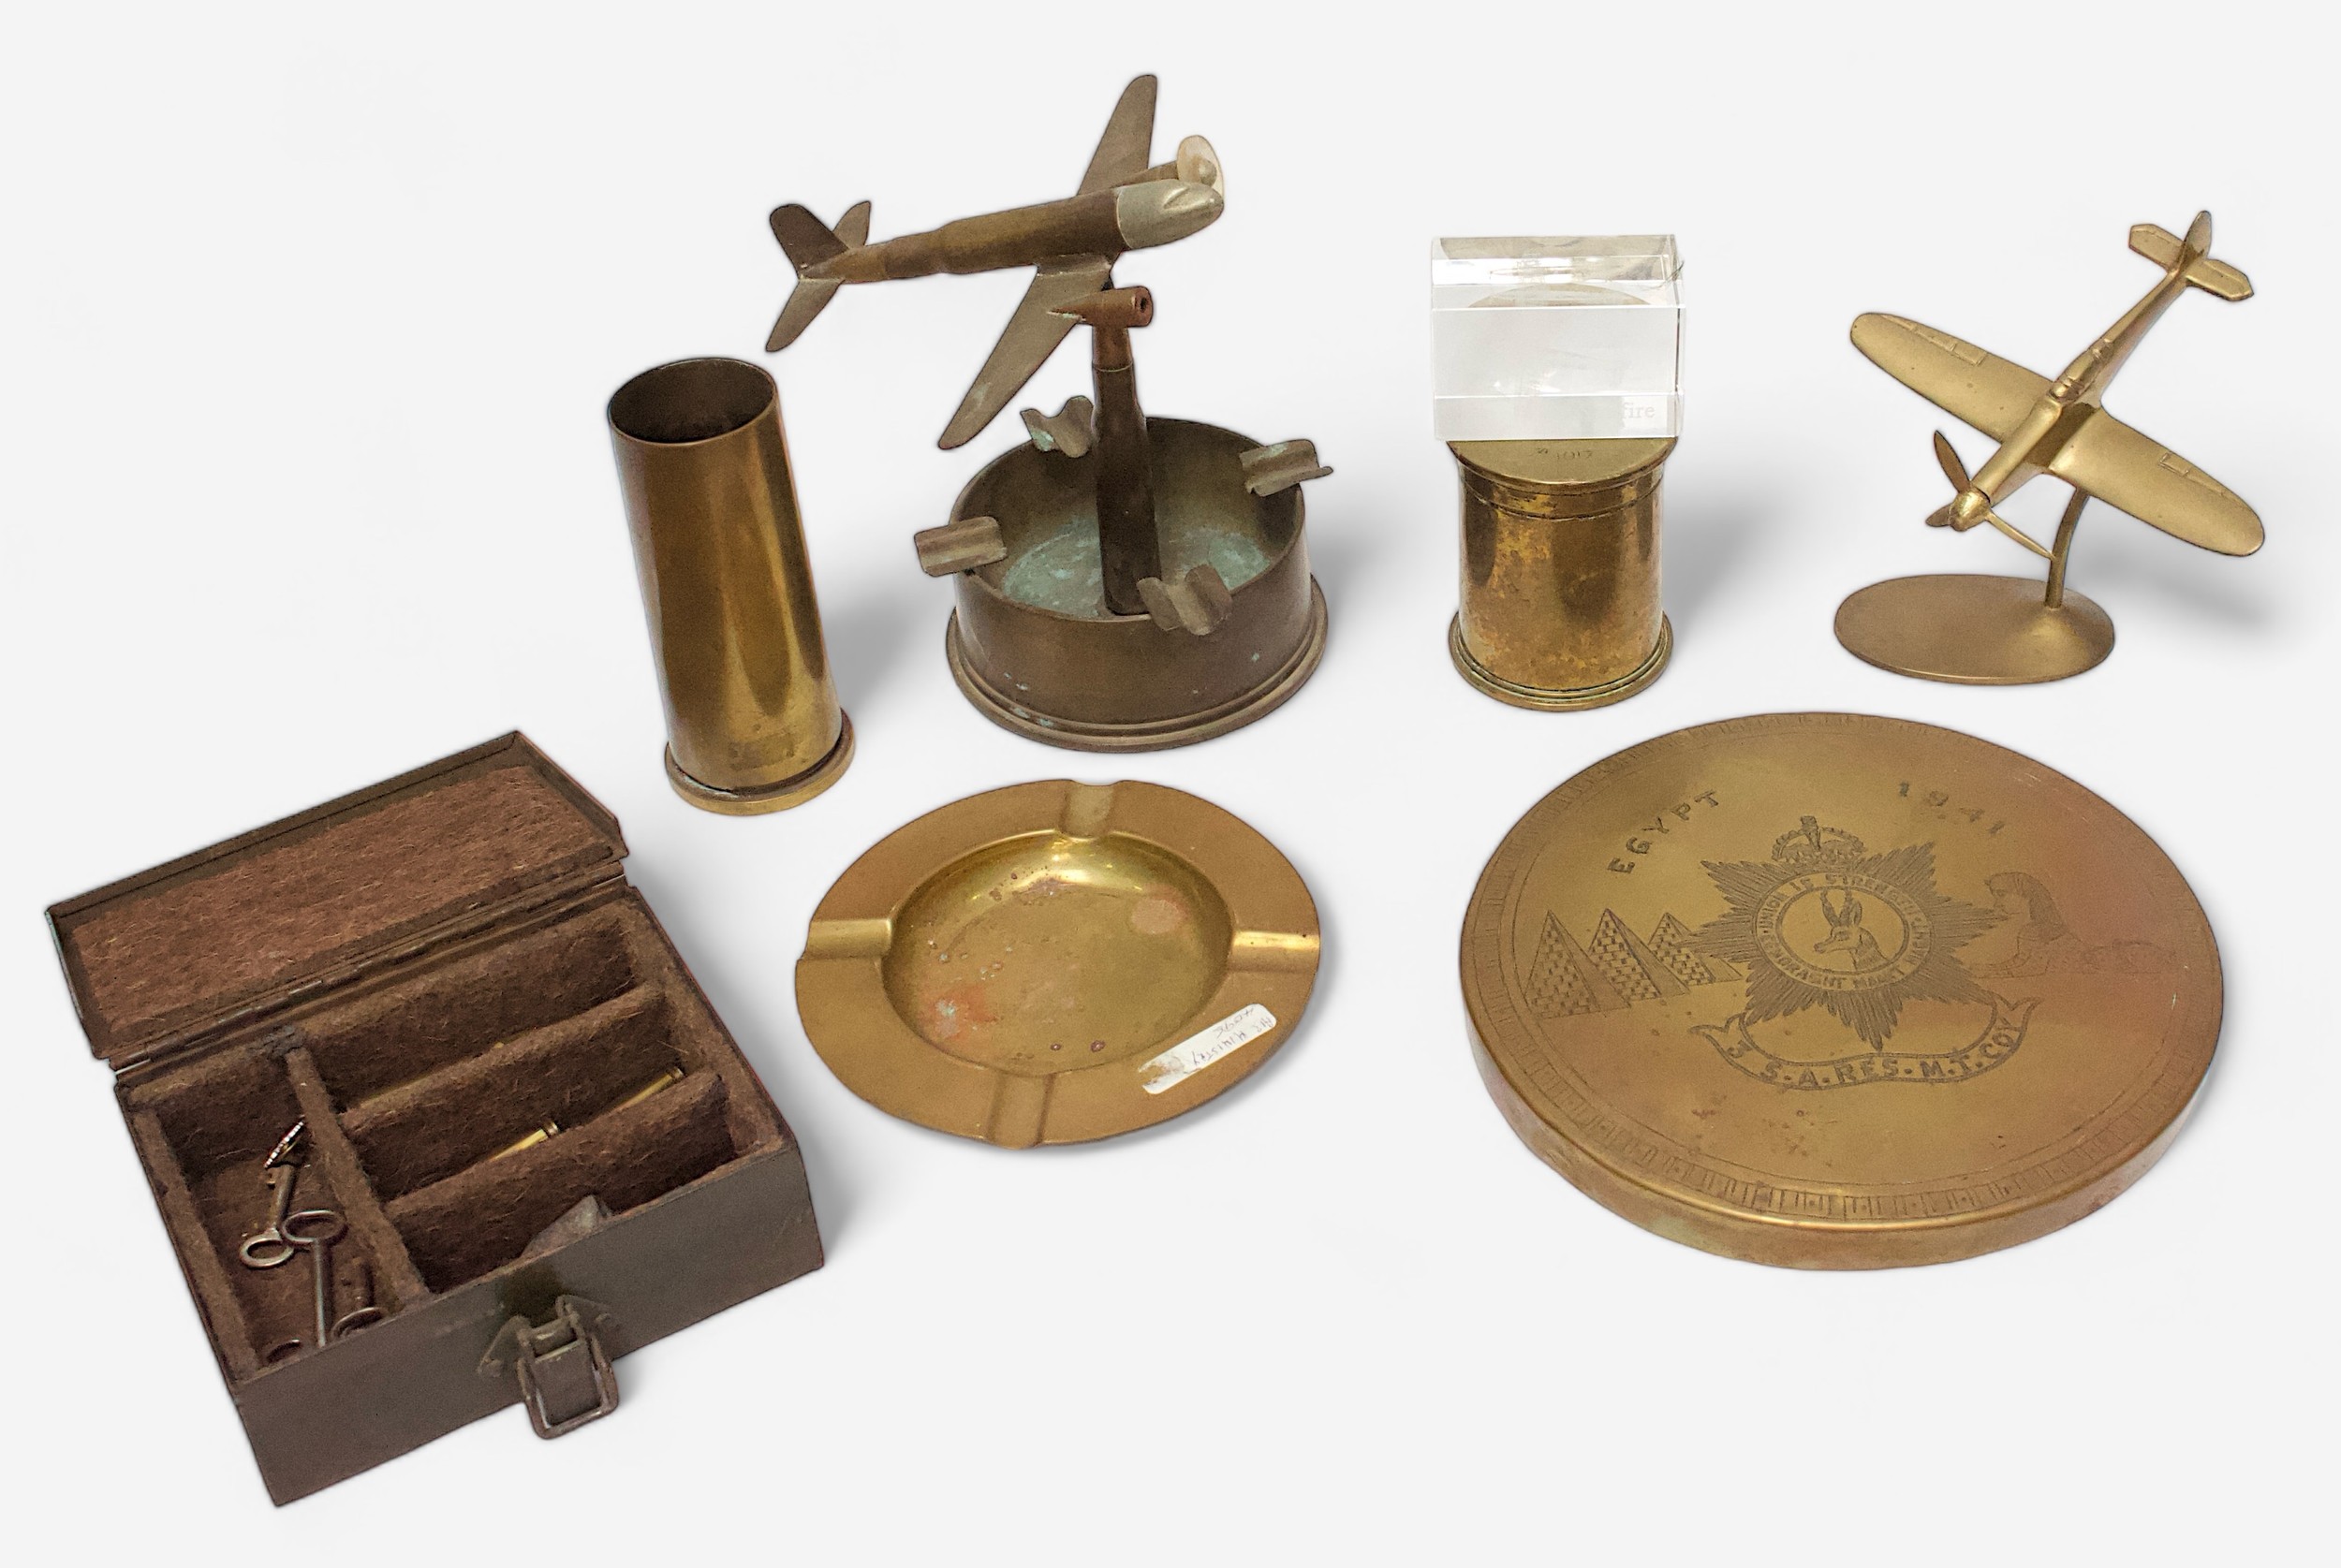 A small collection of assorted WWI and WWII trench art items including ashtrays, vases and ornaments